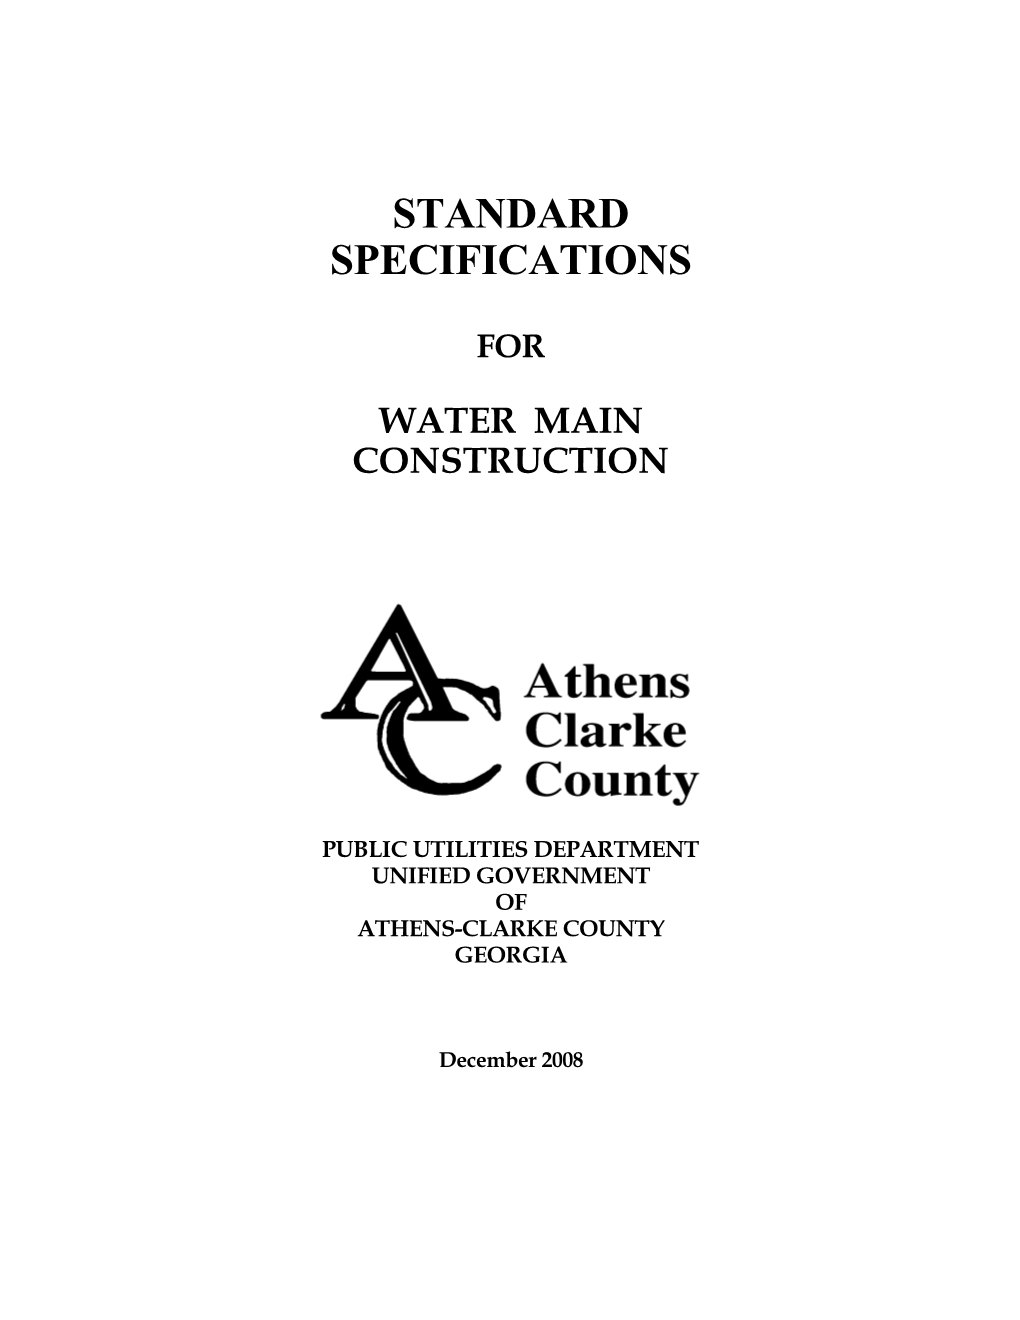 Standard Specifications for Water Main Construction